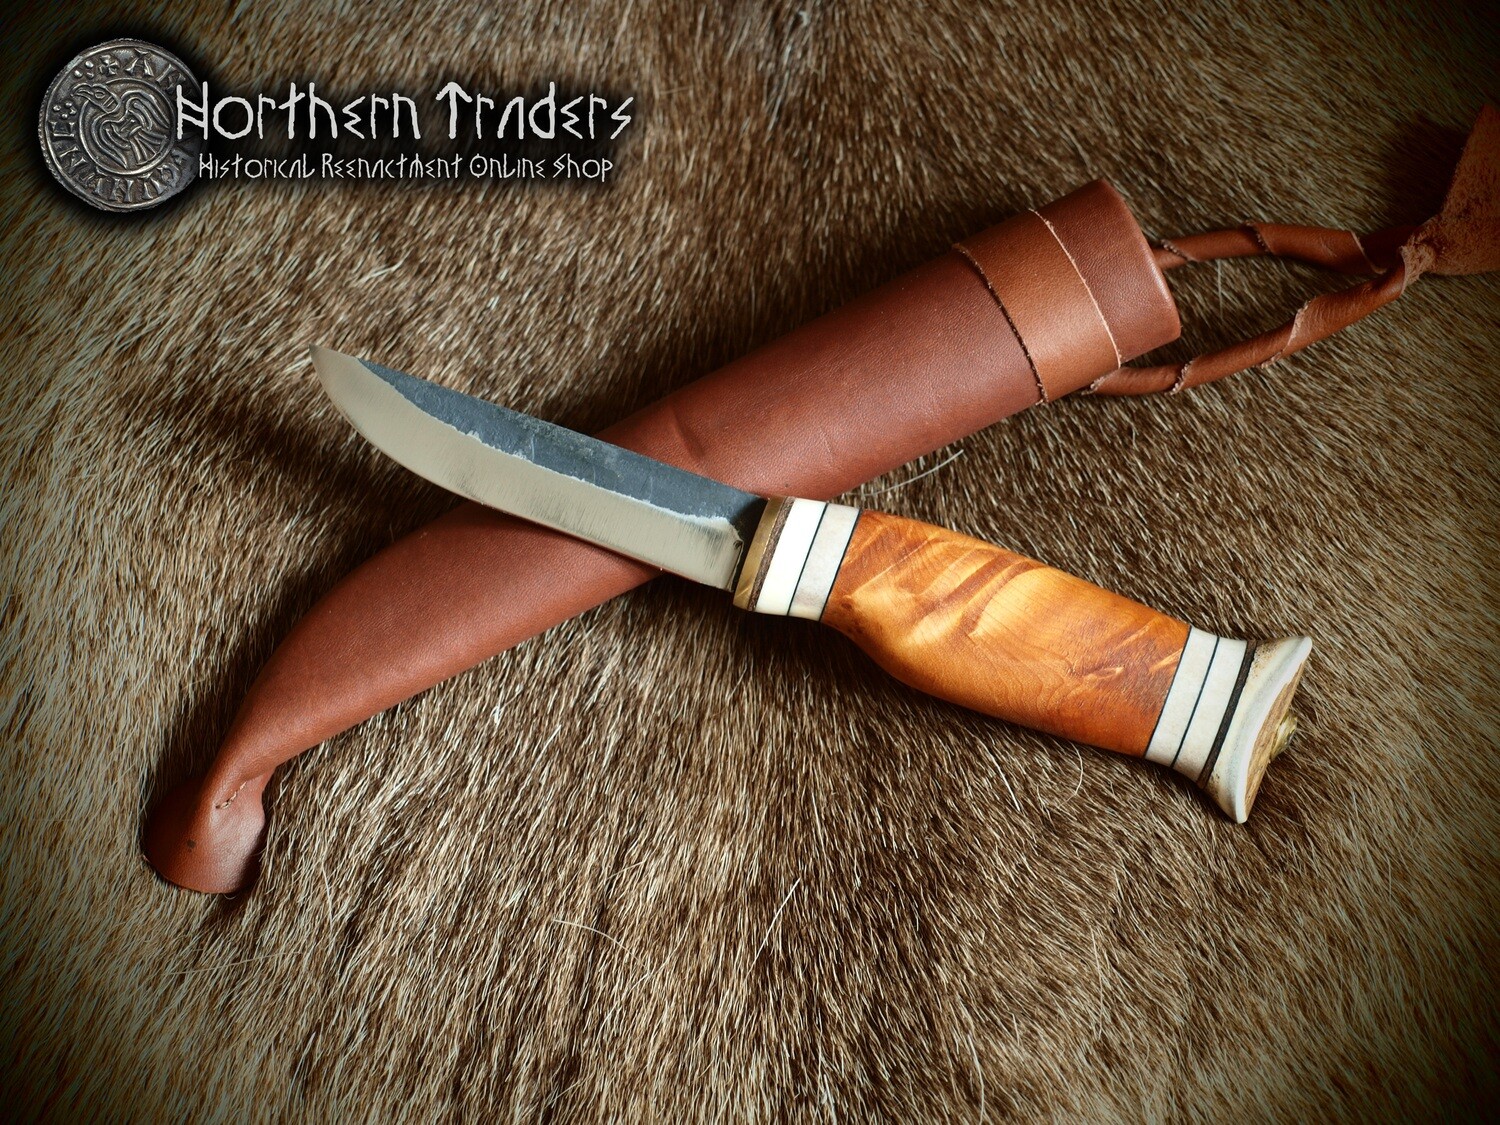 Finnish Puukko Knife with Willow Gnarl Handle